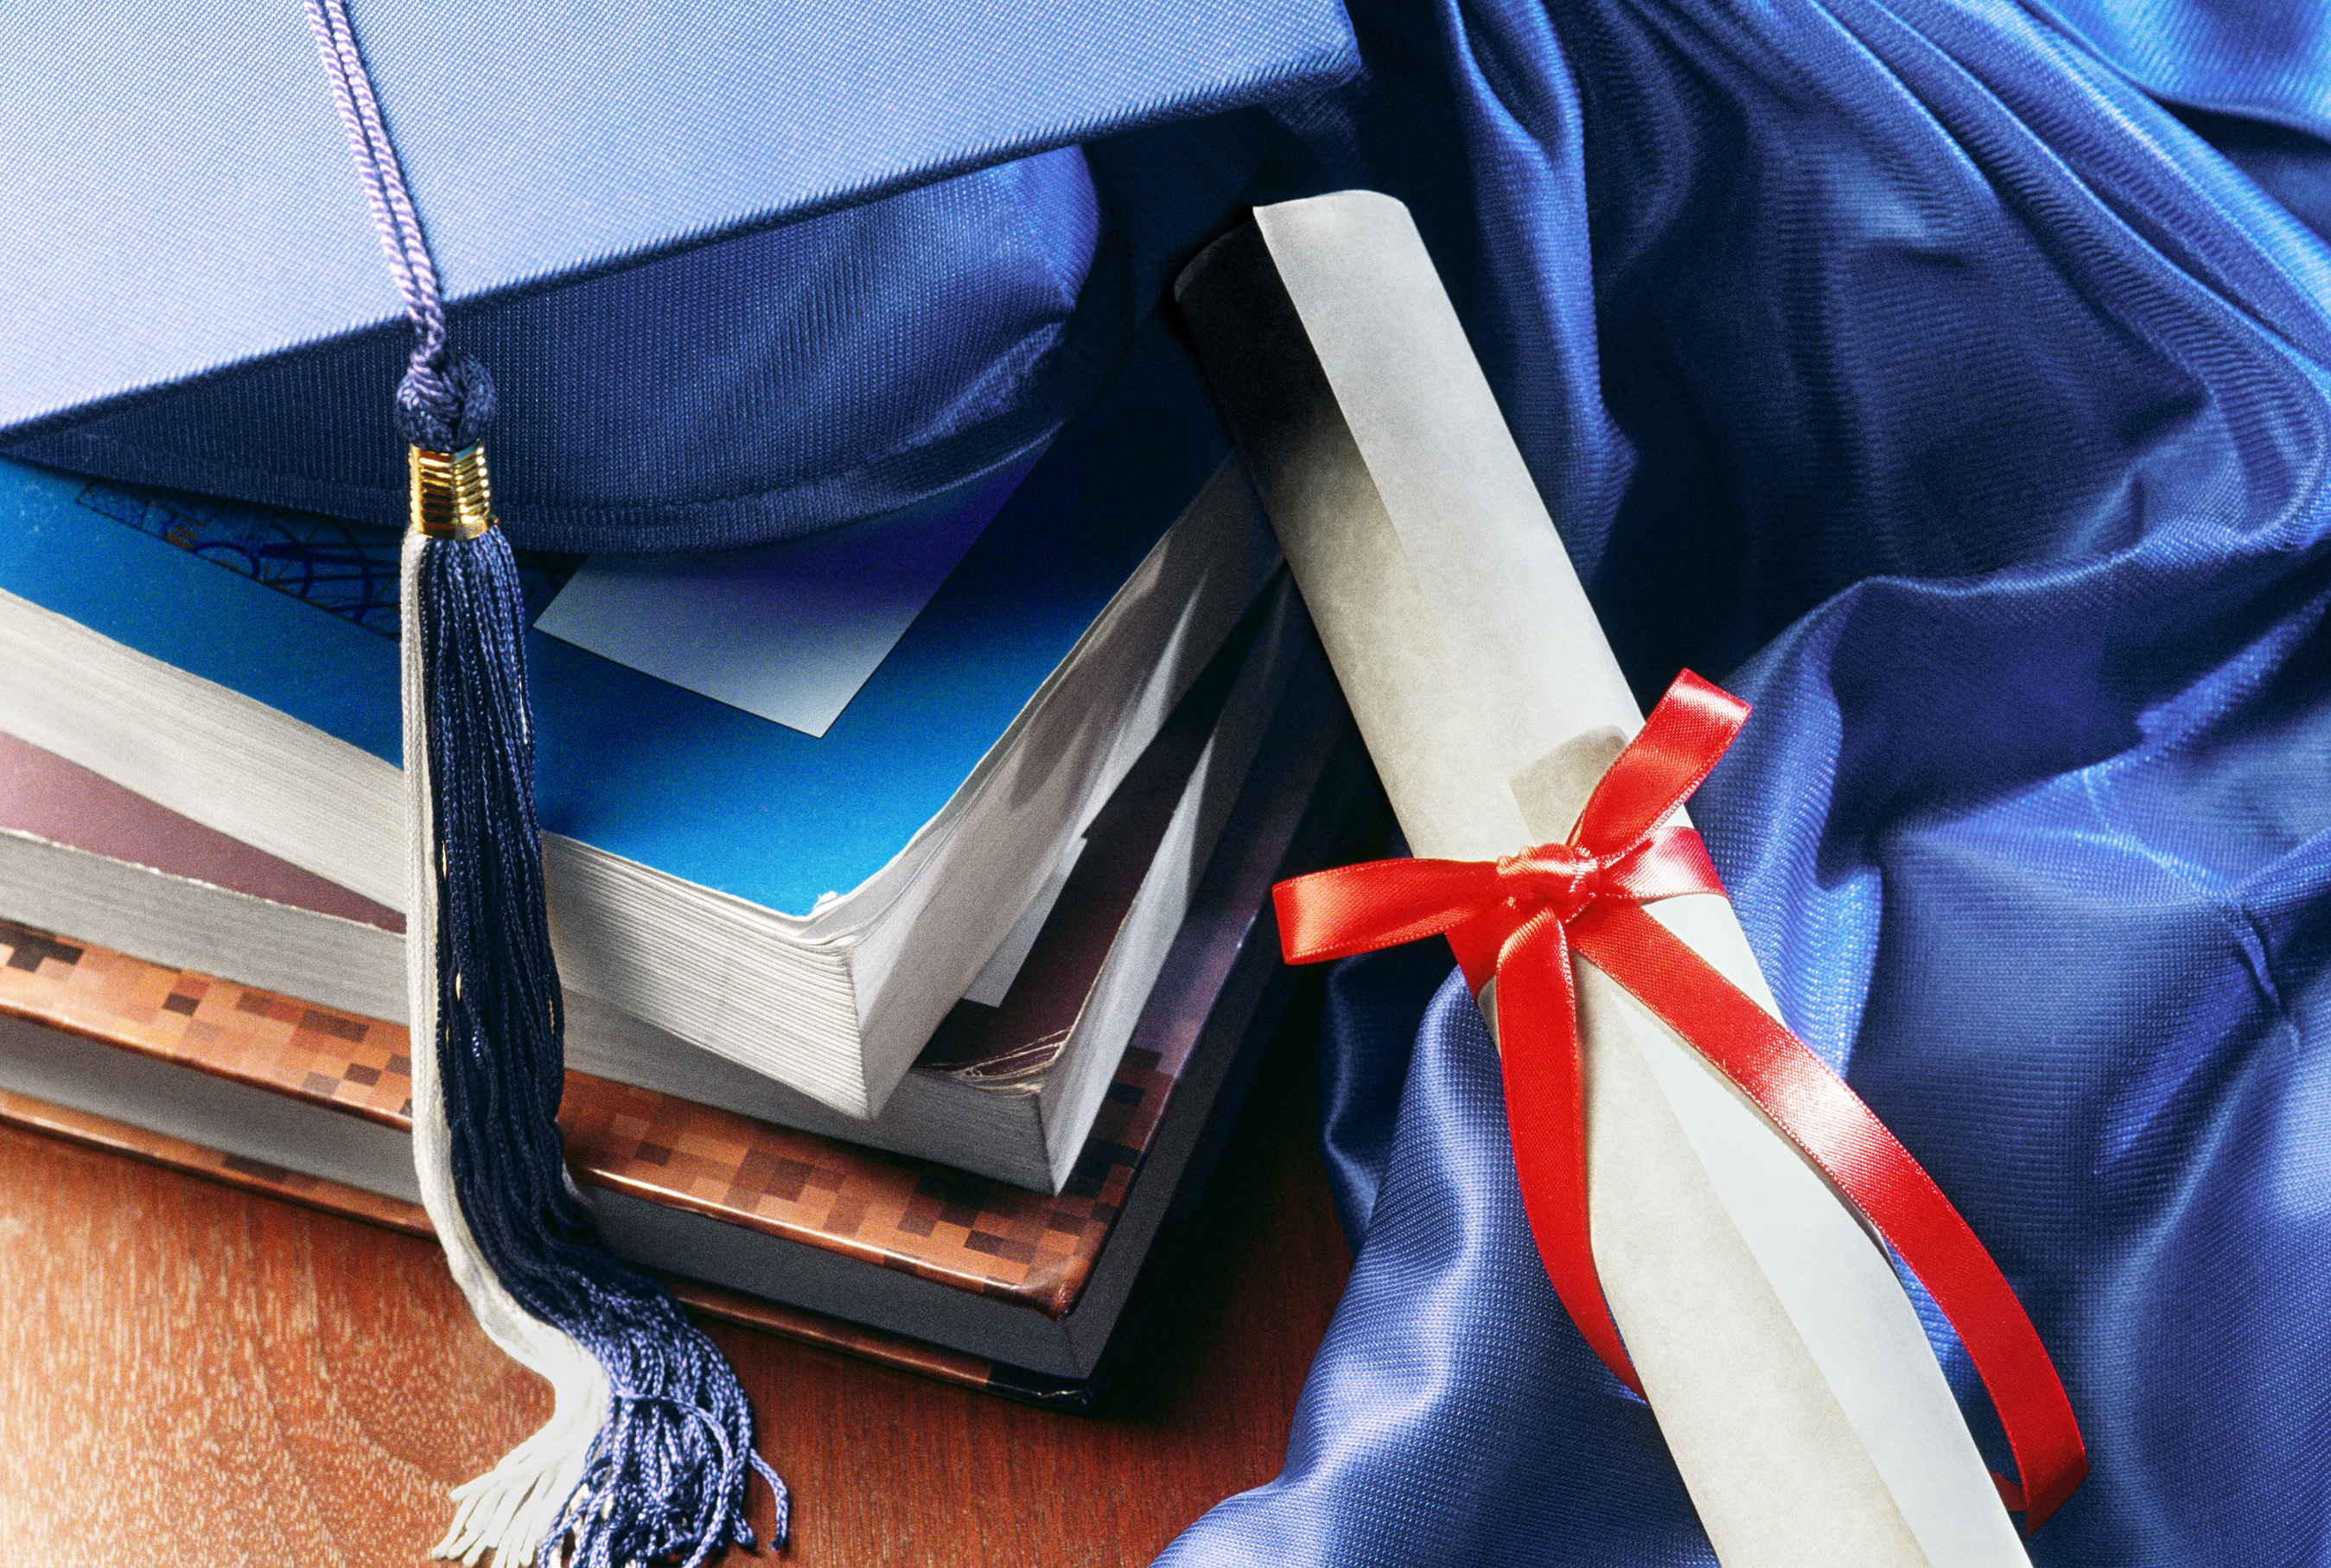 About: Cords for Graduation – What do they mean